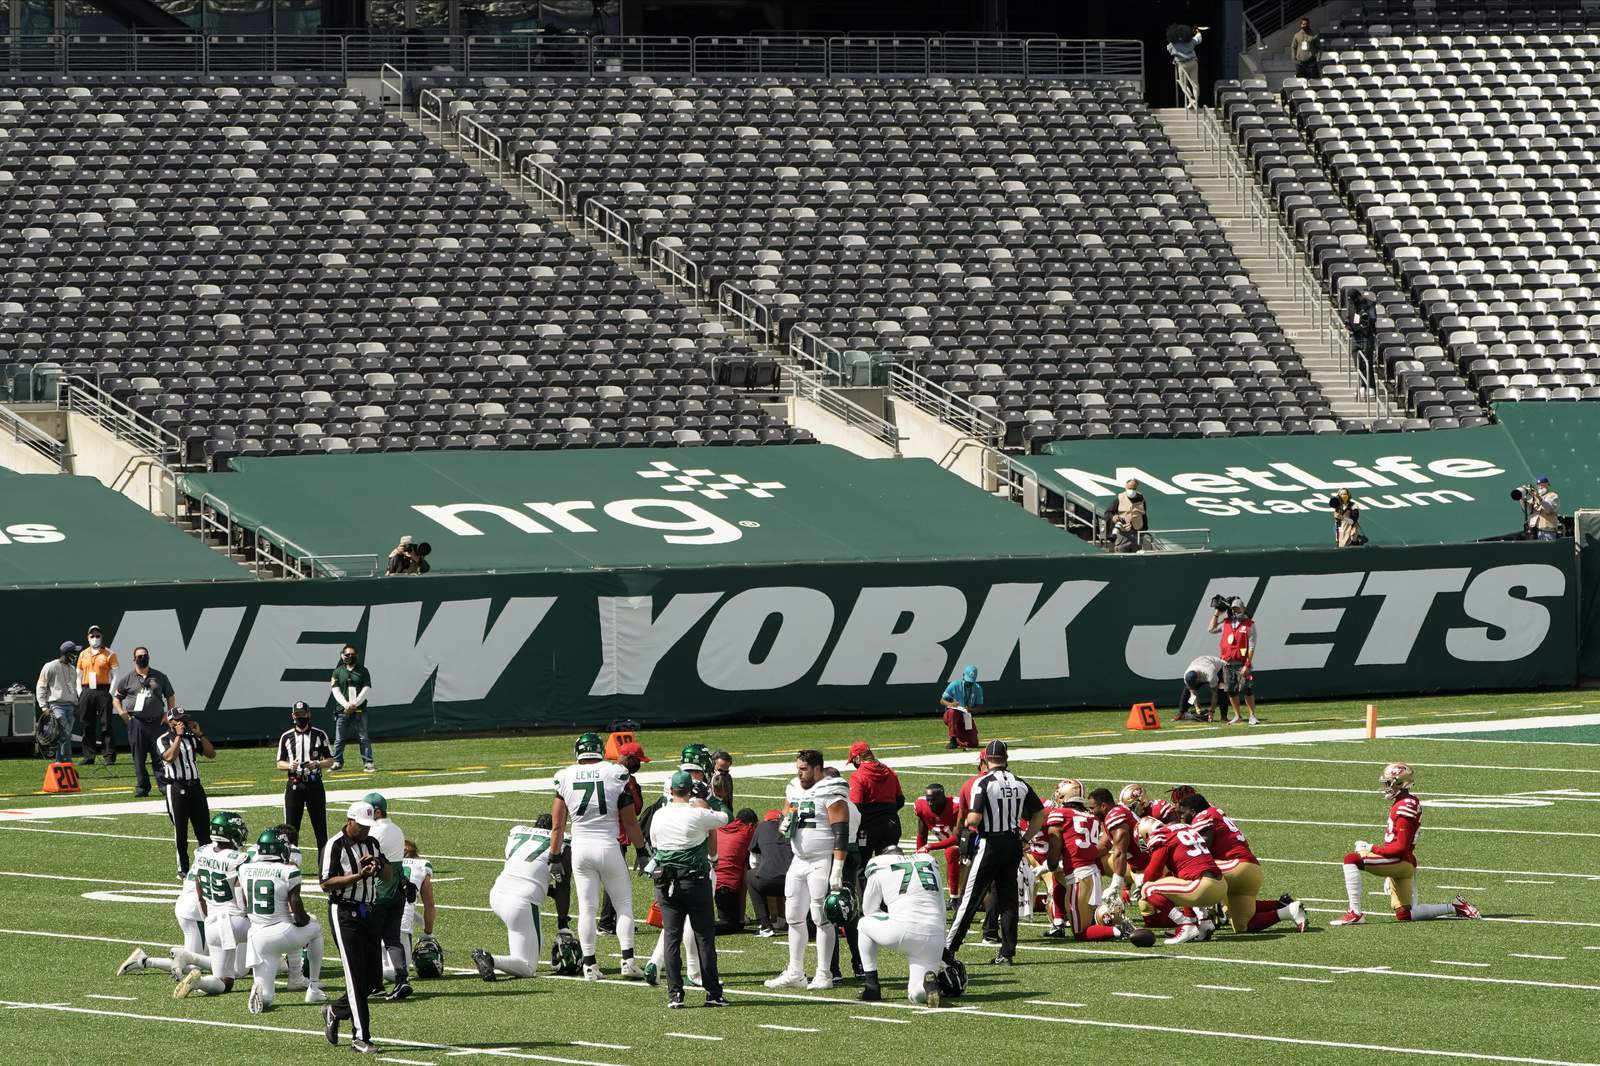 49ers complain about playing surface at MetLife Stadium